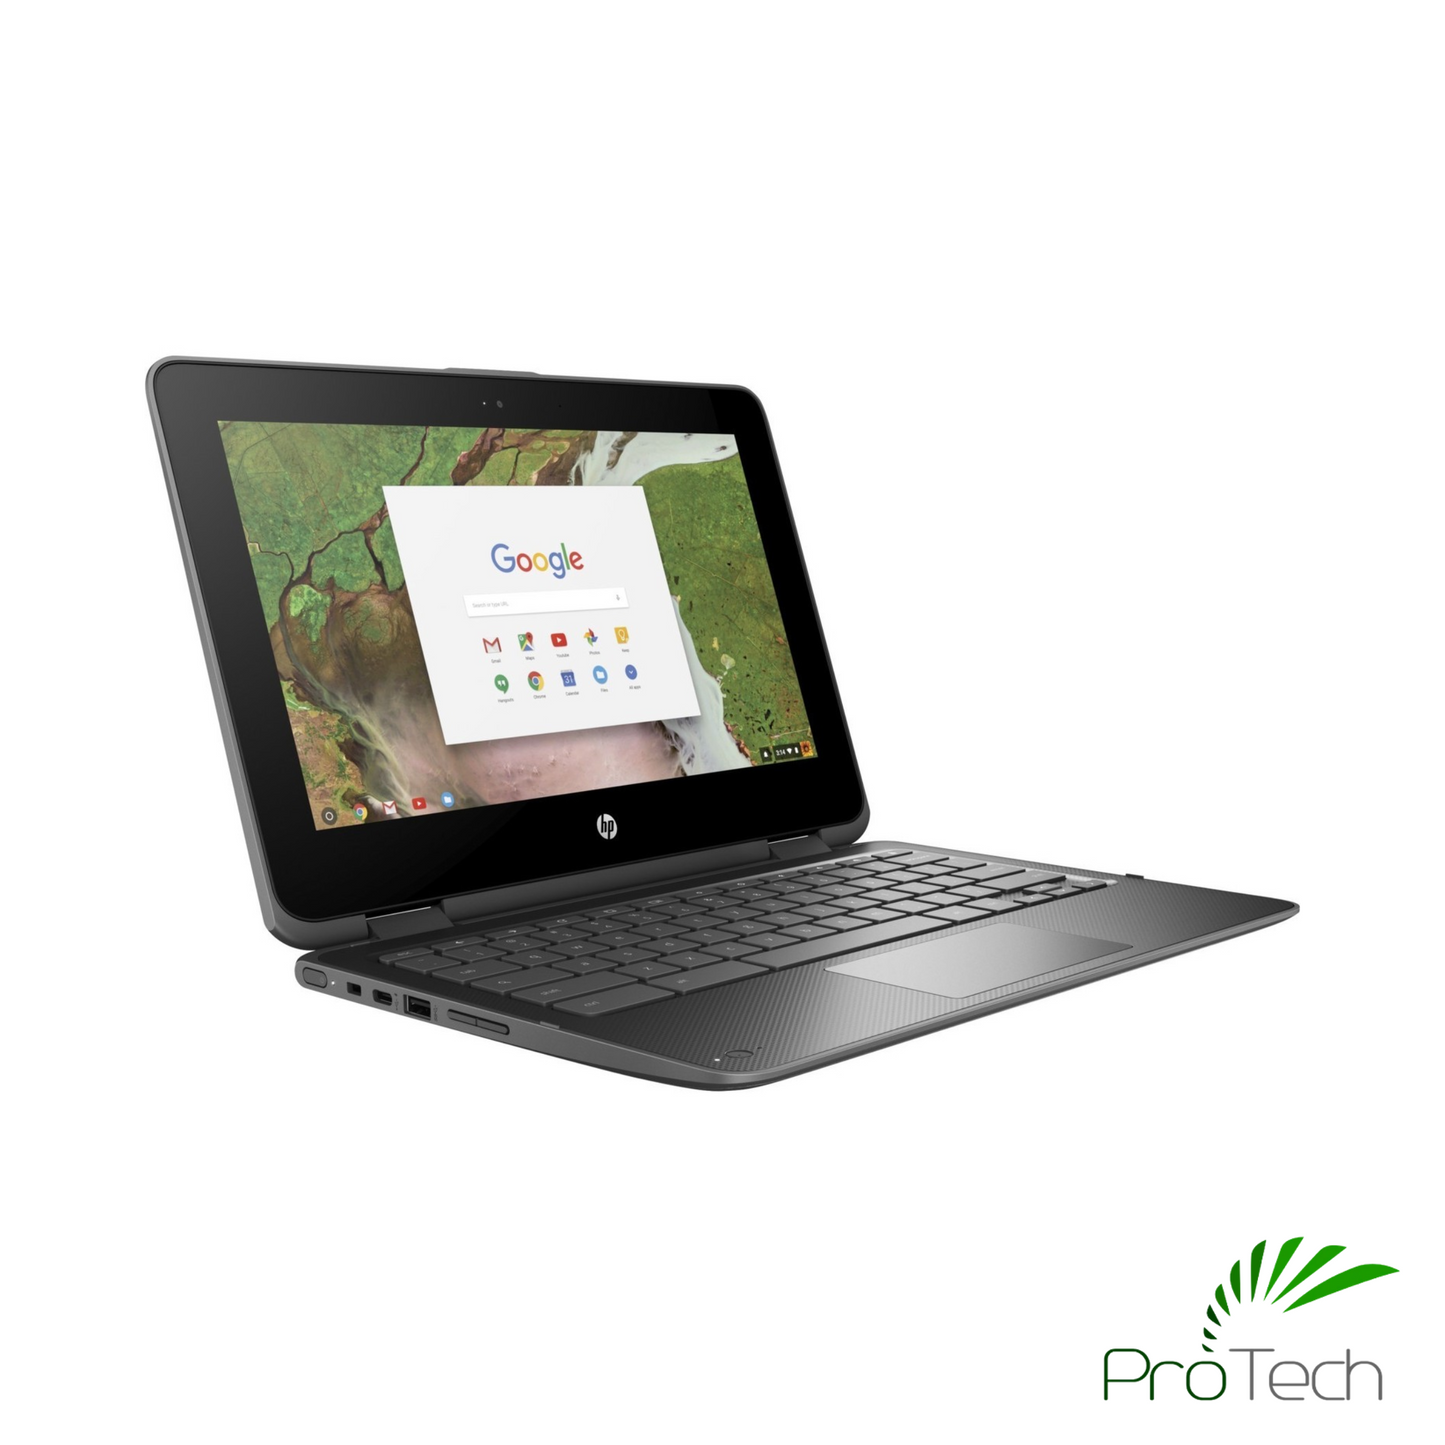 HP Chromebook 11 G1 EE x360 Convertible | Celeron | 4GB RAM | 64GB SSD ProTech I.T. Solutions